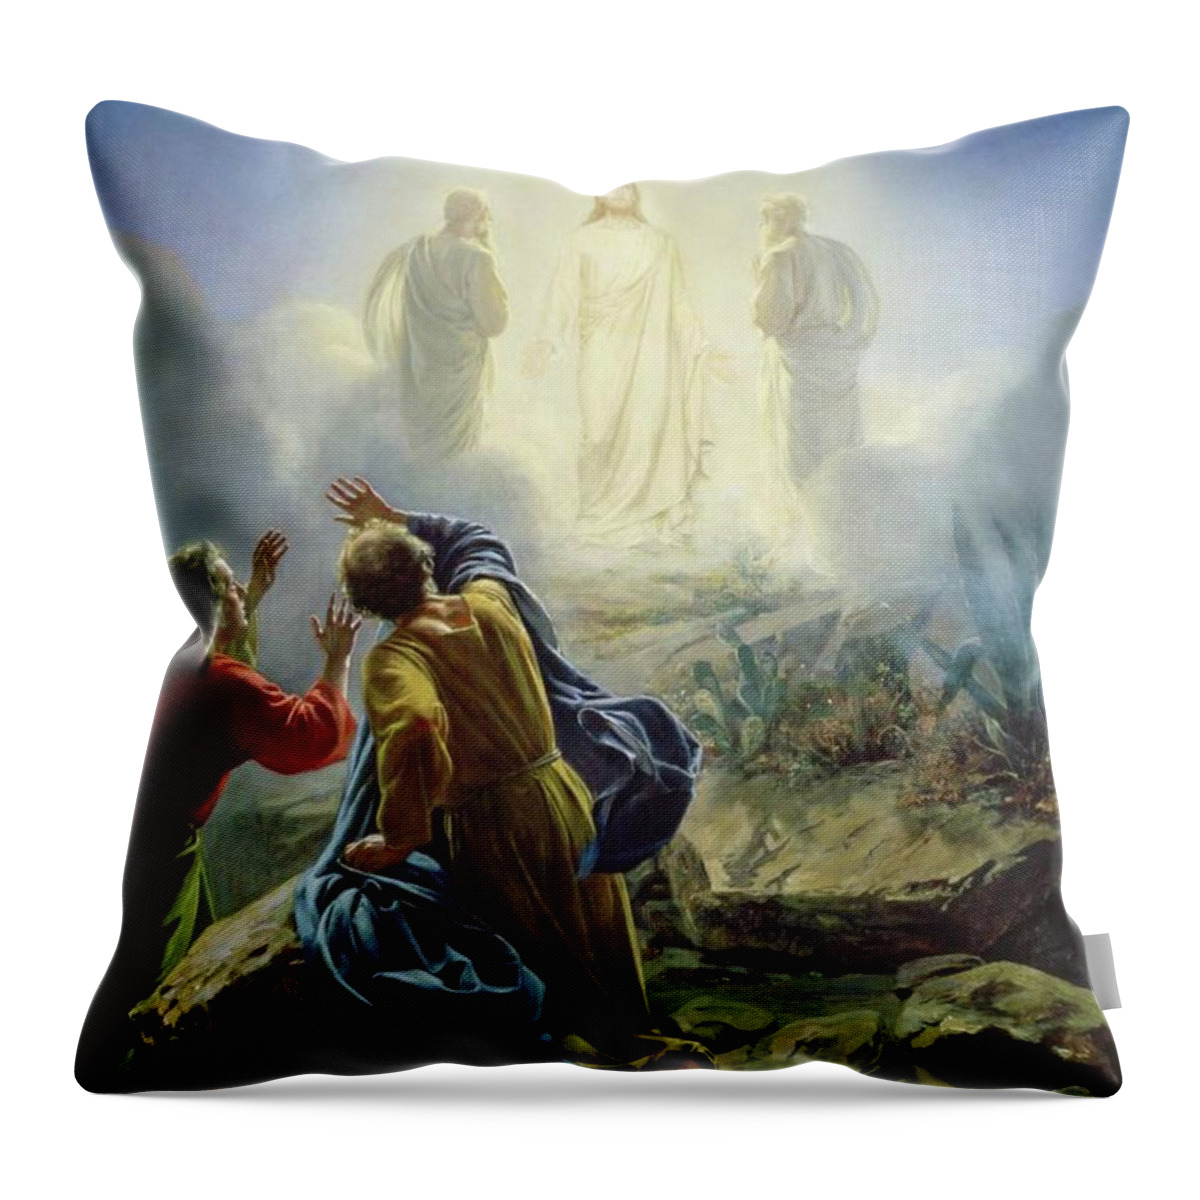 Christian Throw Pillow featuring the painting Transfiguration of Jesus by Carl Bloch